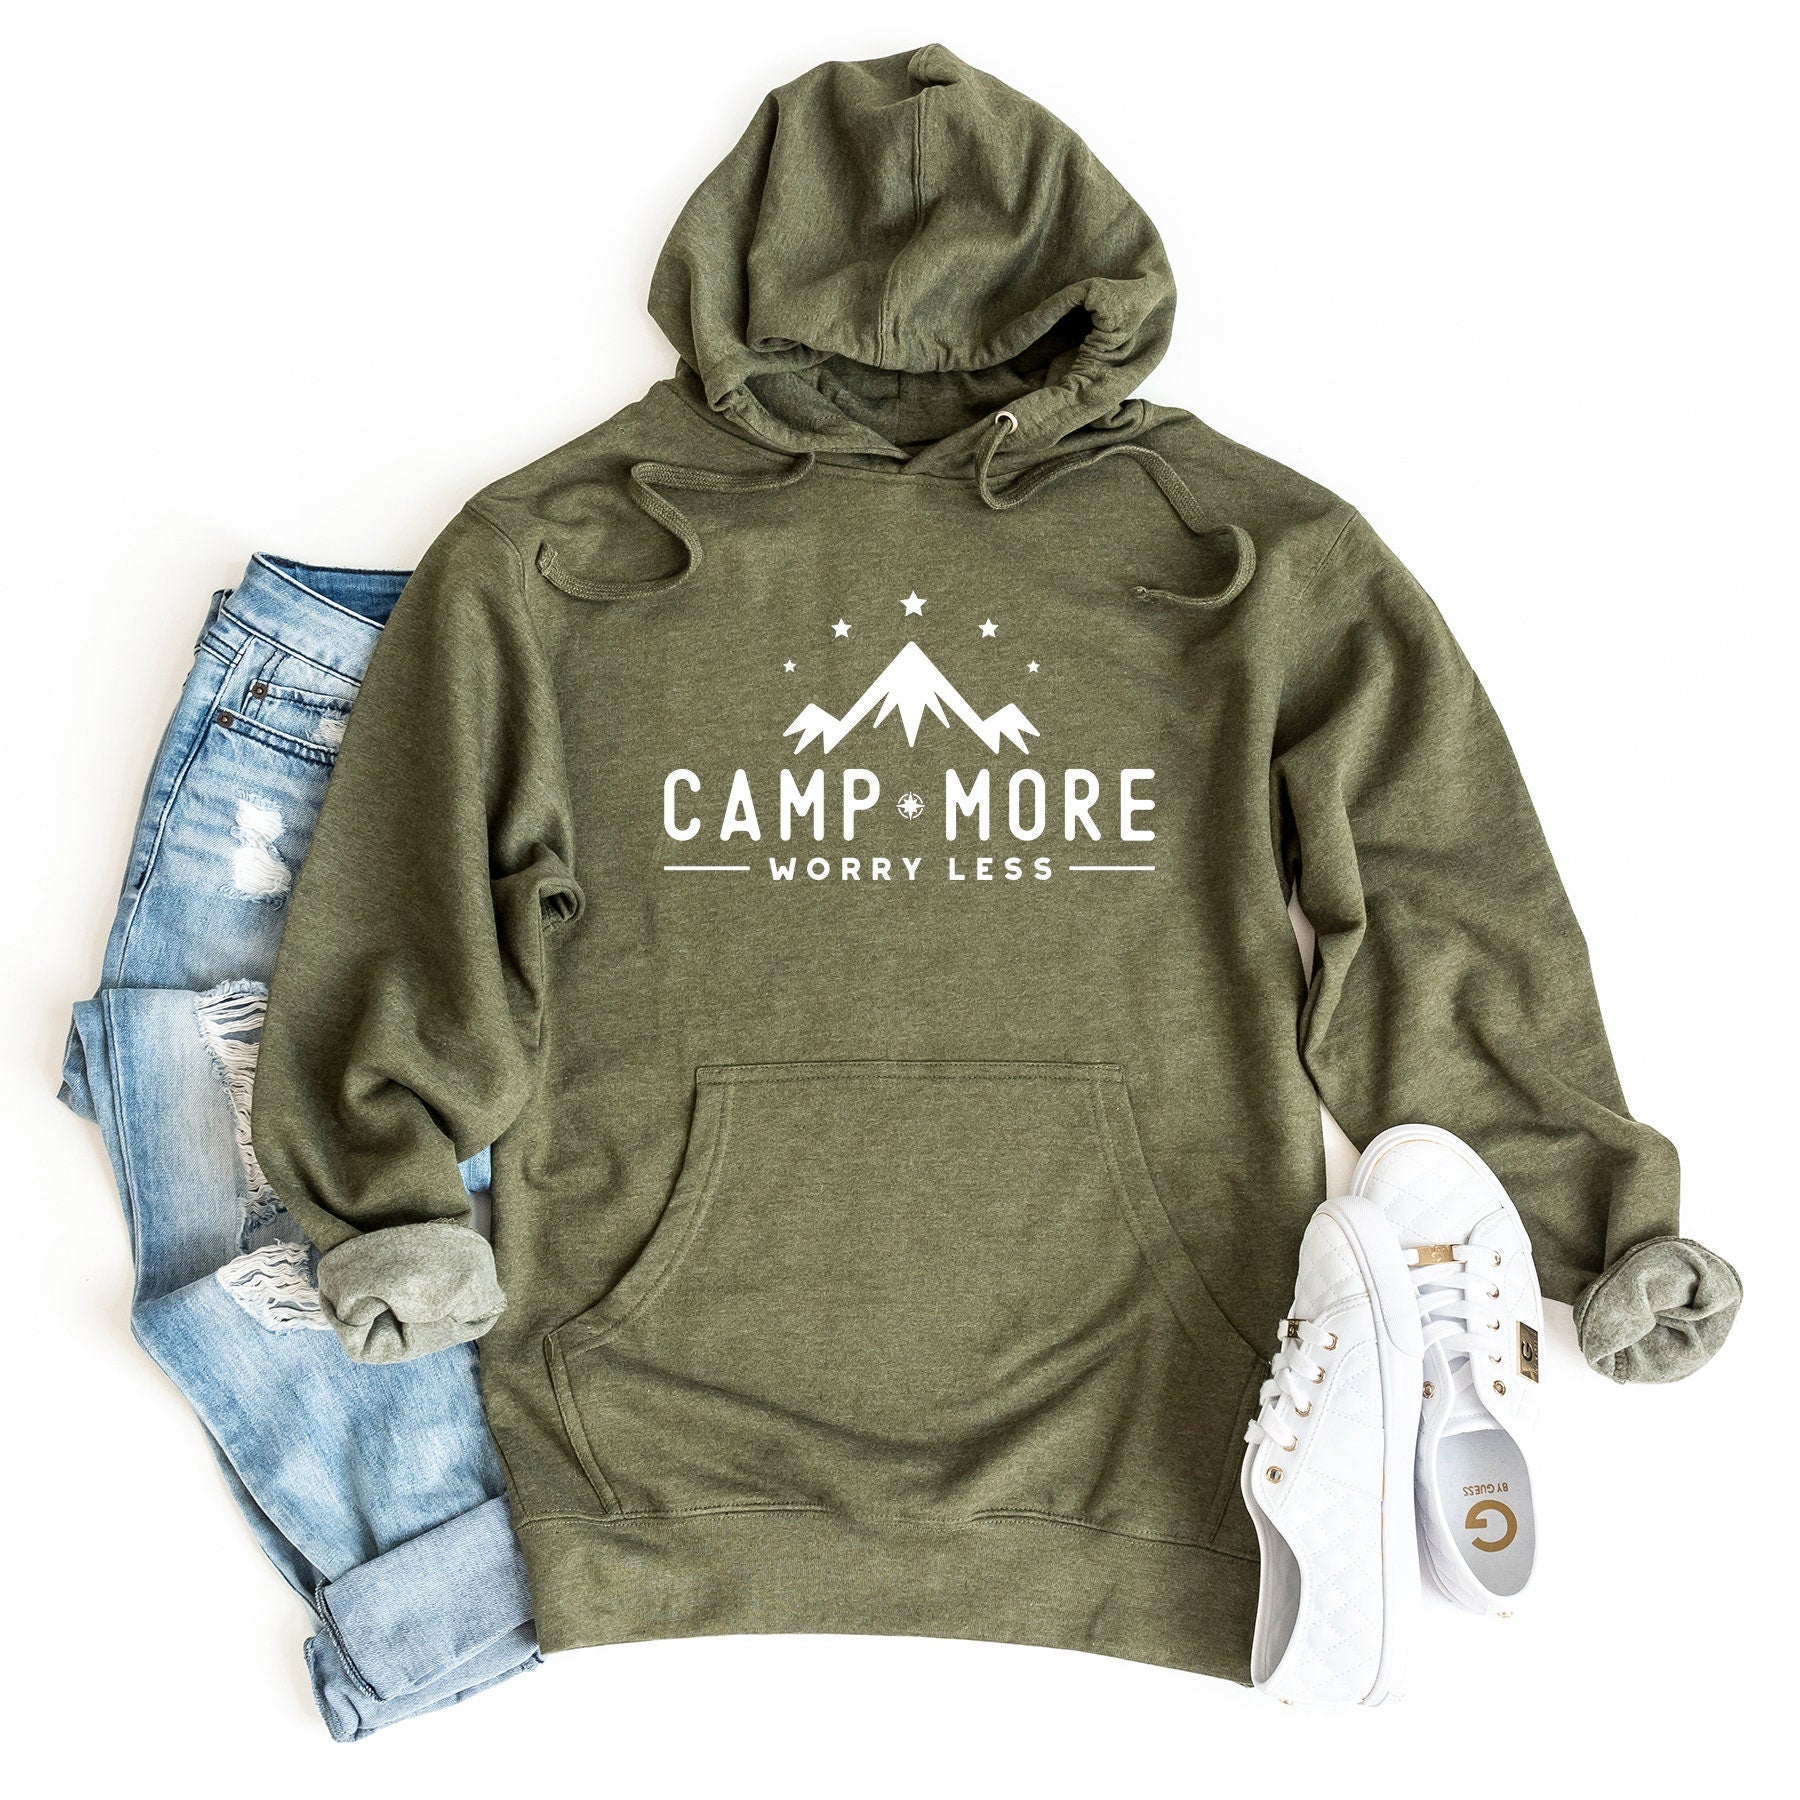 a green hoodie with the camp more logo on it